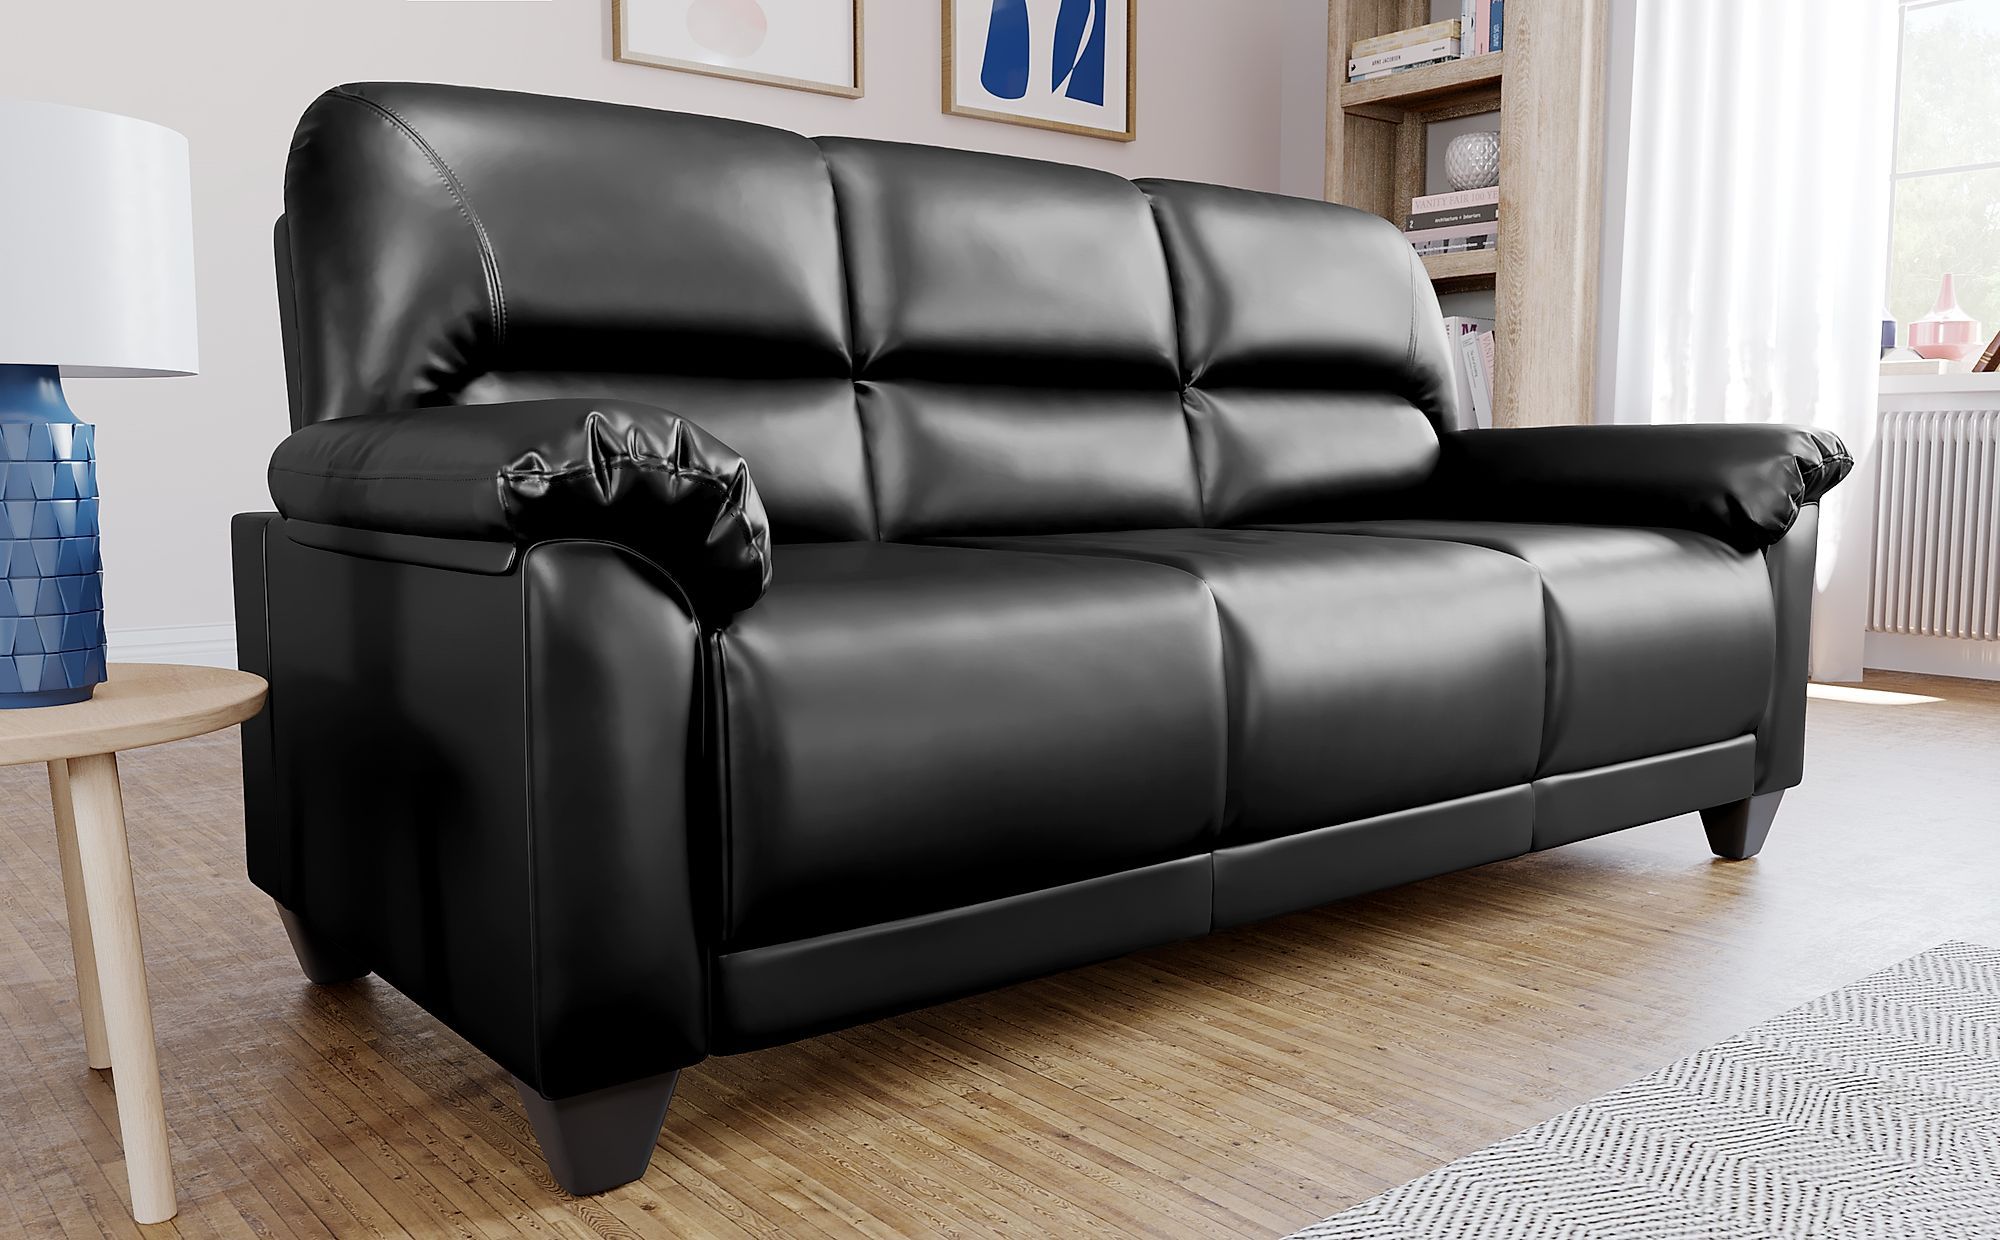 Kenton Small Black Leather 3 Seater Sofa | Furniture Choice Inside Sofas In Black (View 14 of 20)